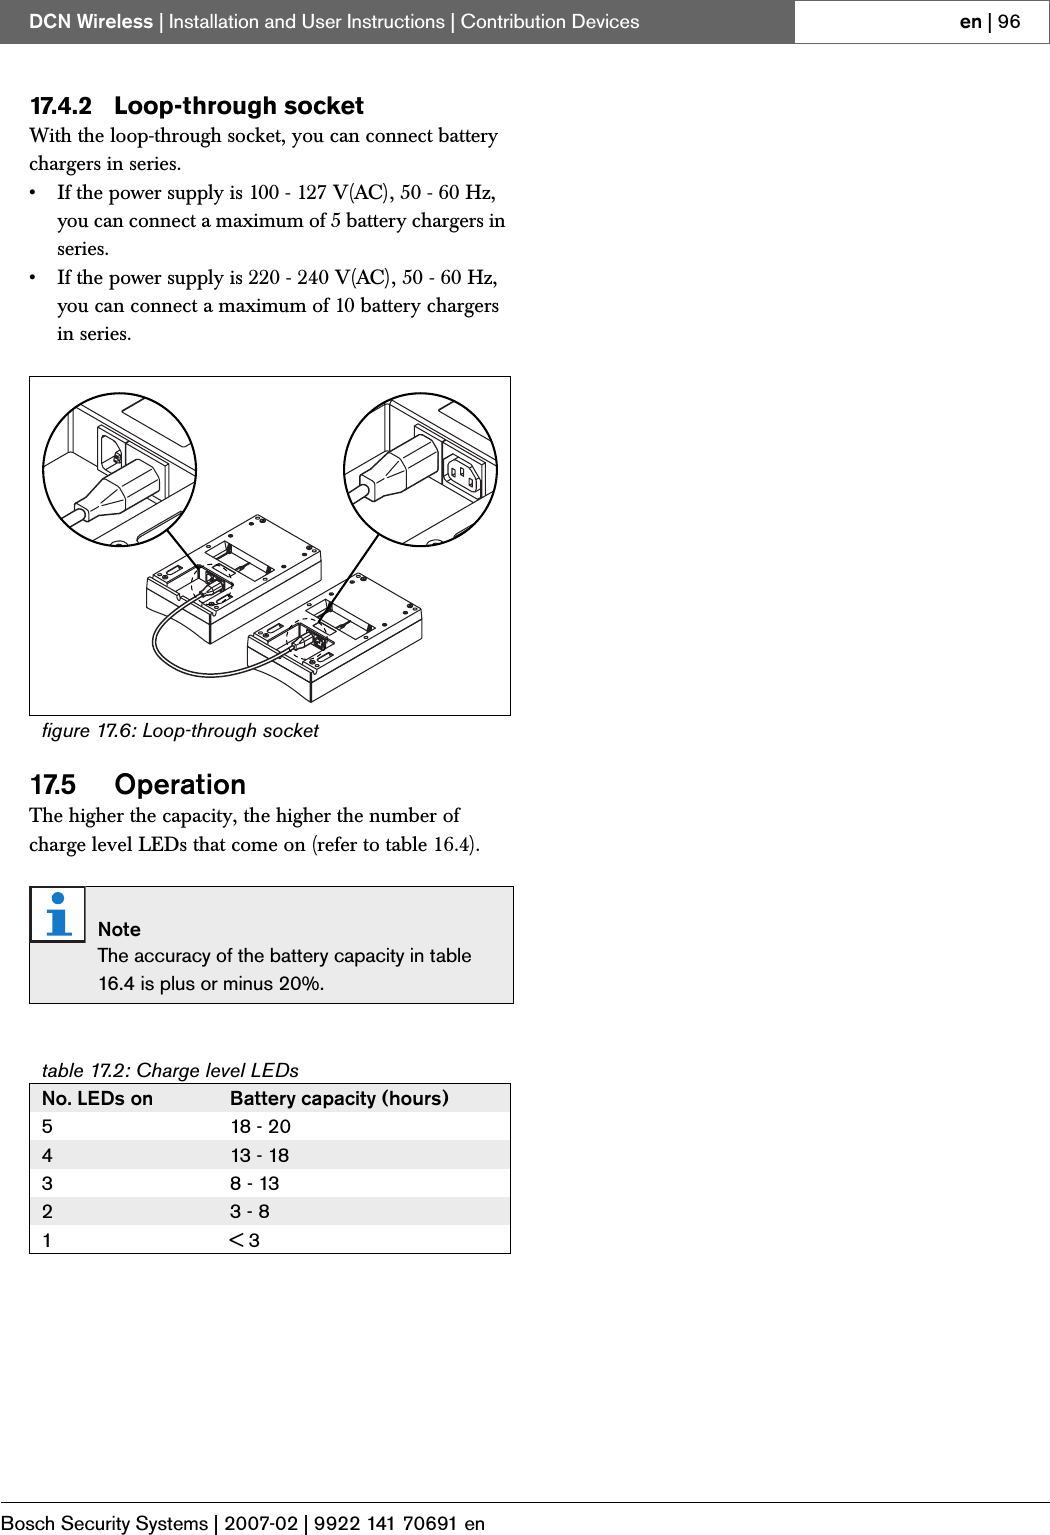 Page 67 of Bosch Security Systems DCNWAP Wireless Access Point User Manual Part 2